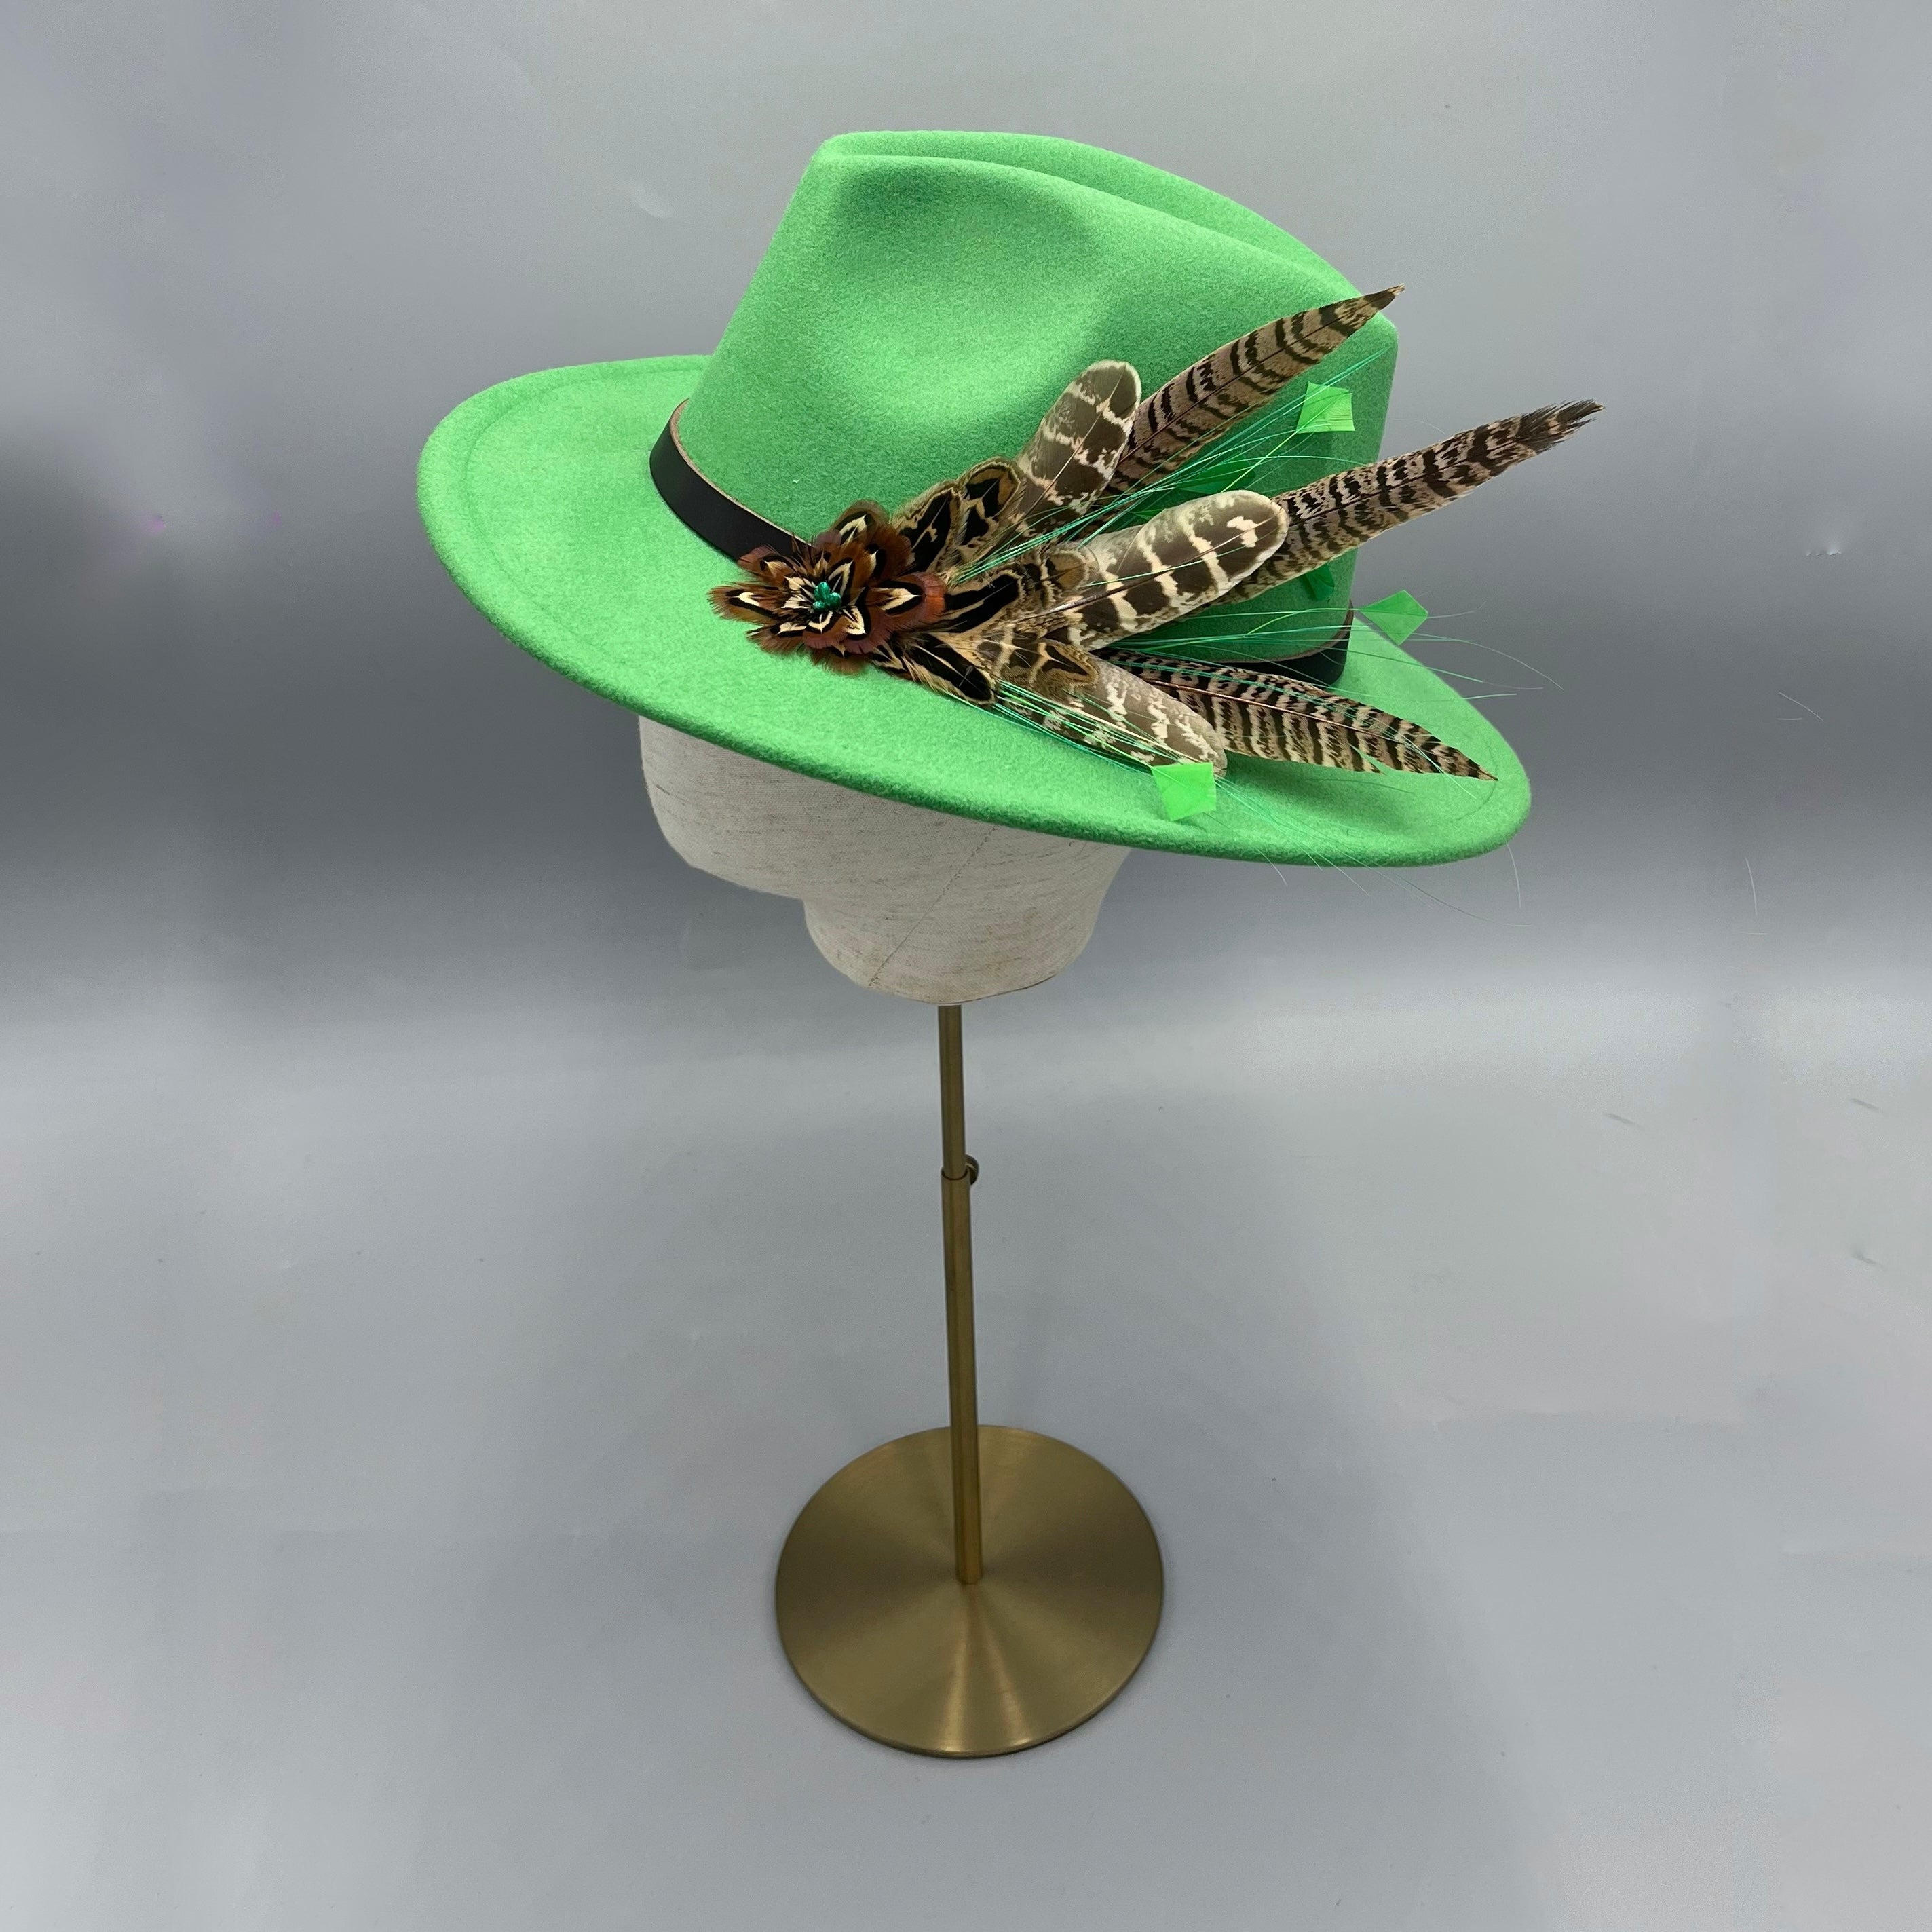 Emerald green fedora hat with pheasant feathers